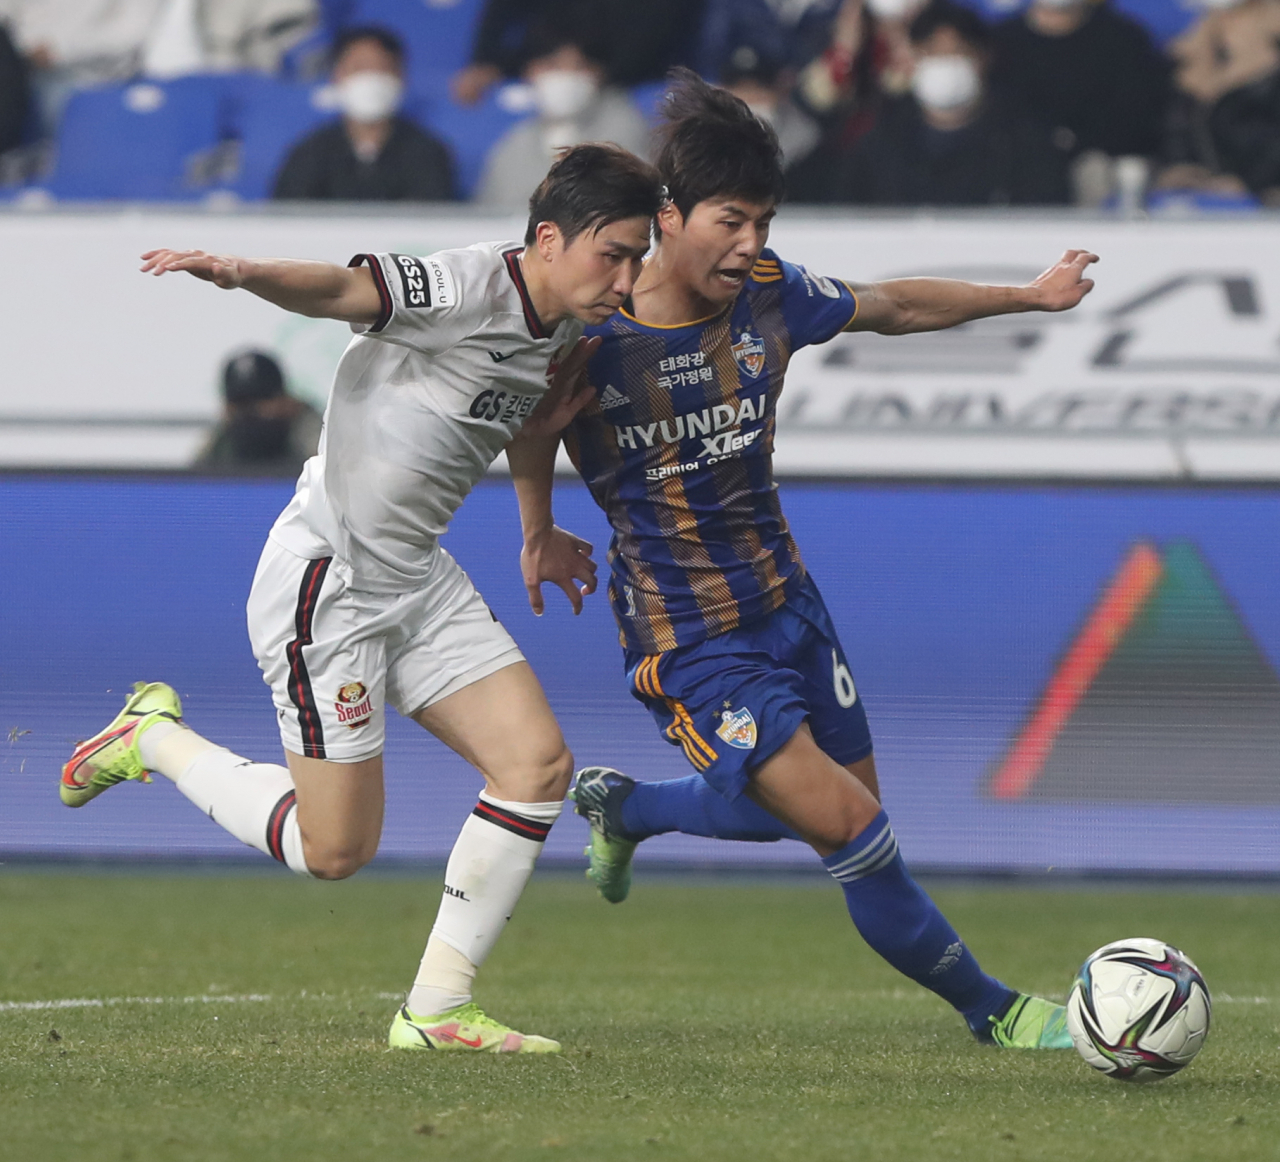 Yoon Jong-gyu of FC Seoul (L) and Seol Young-woo of Ulsan Hyundai FC battle for the ball during the clubs' K League 1 match at Munsu Football Stadium in Ulsan, some 415 kilometers southeast of Seoul, on March 11, 2022. (Yonhap)